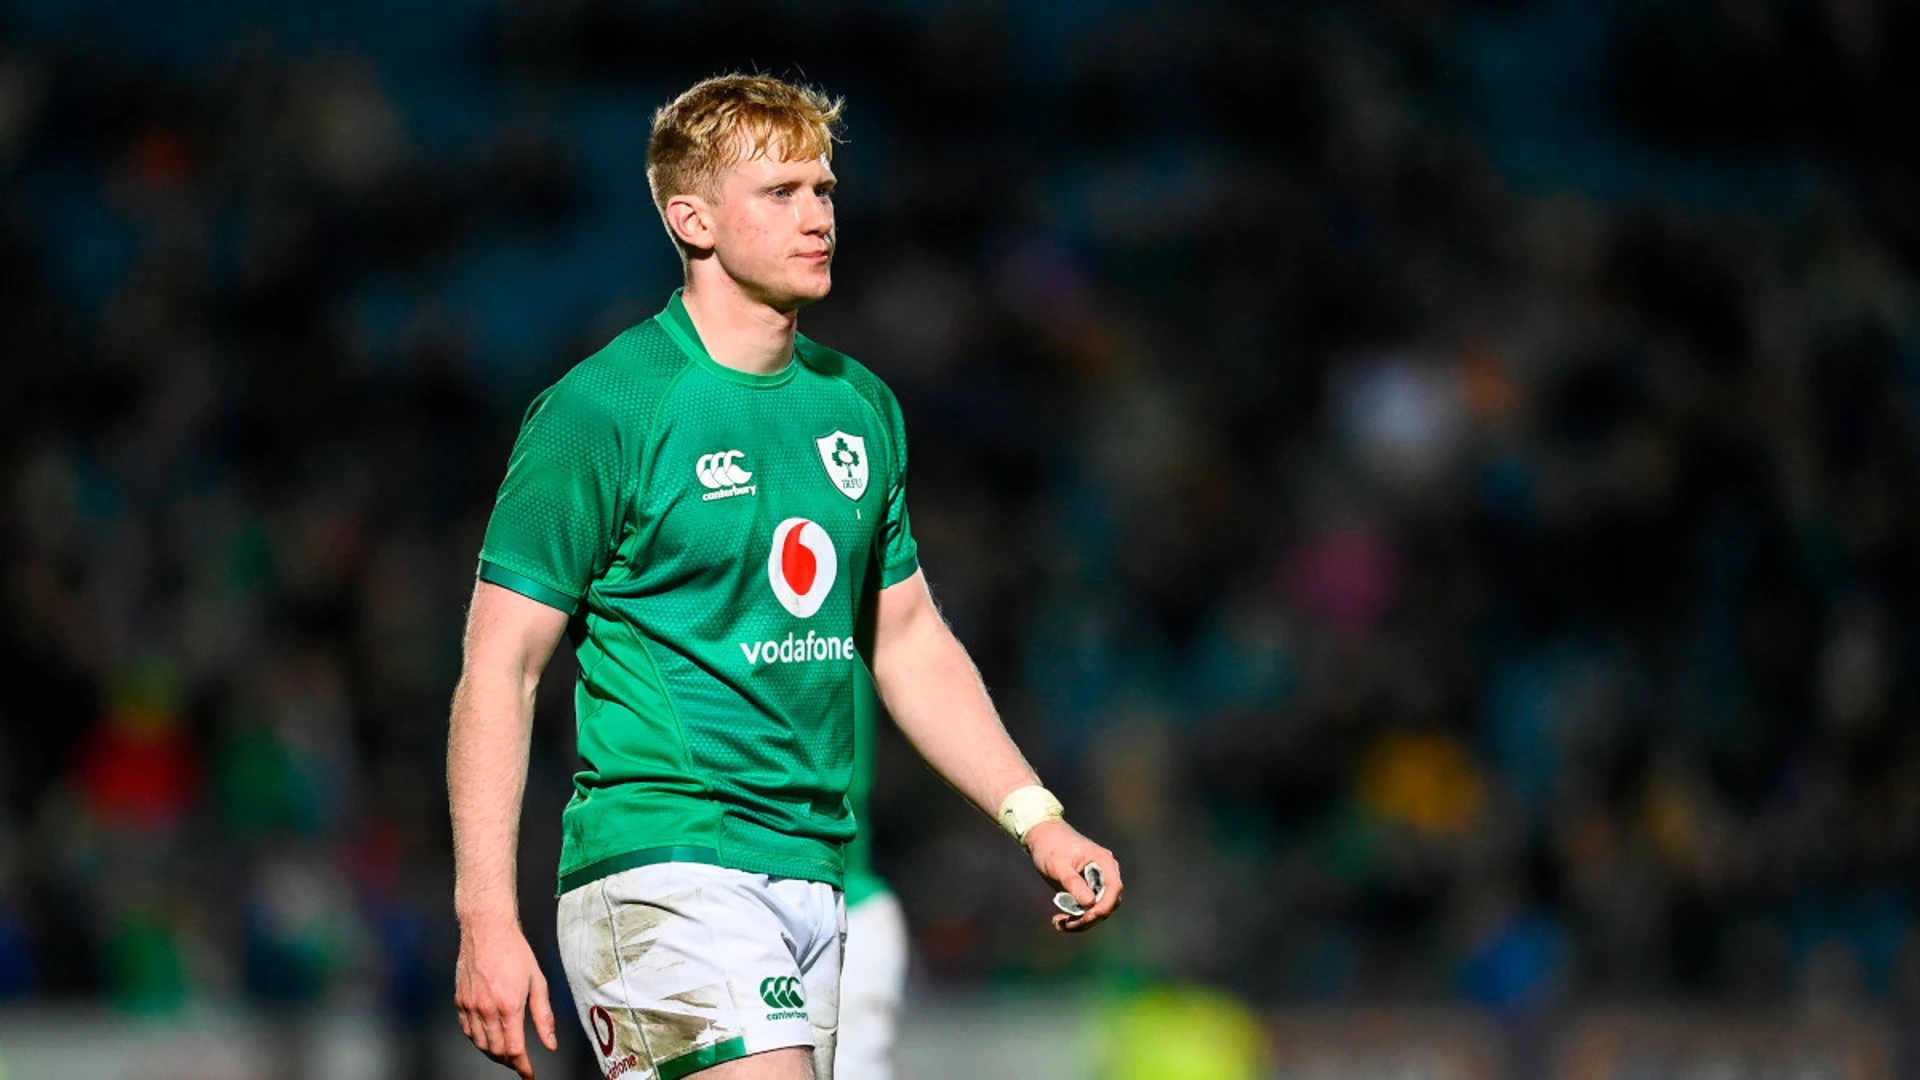  Ireland gamble on out of position rookie at fullback